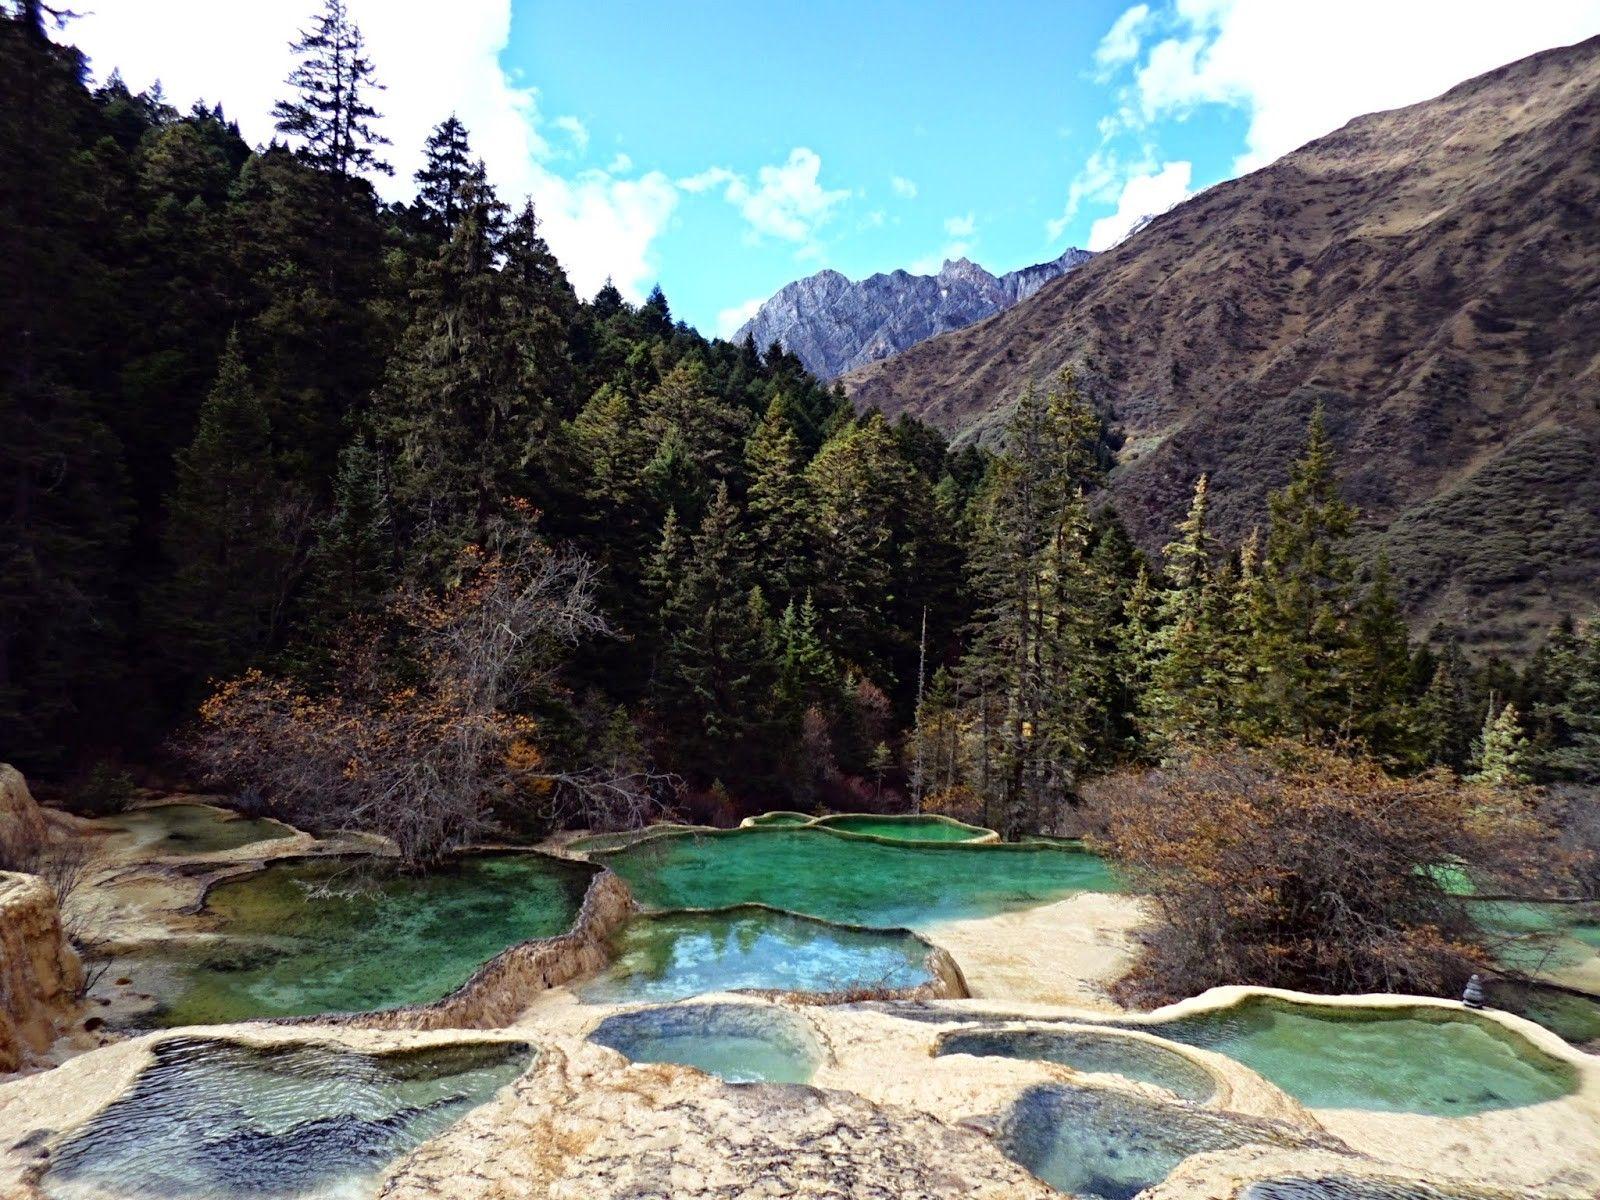 Forest Huanglong Mountain Sichuan China Pools Poolse River Photo